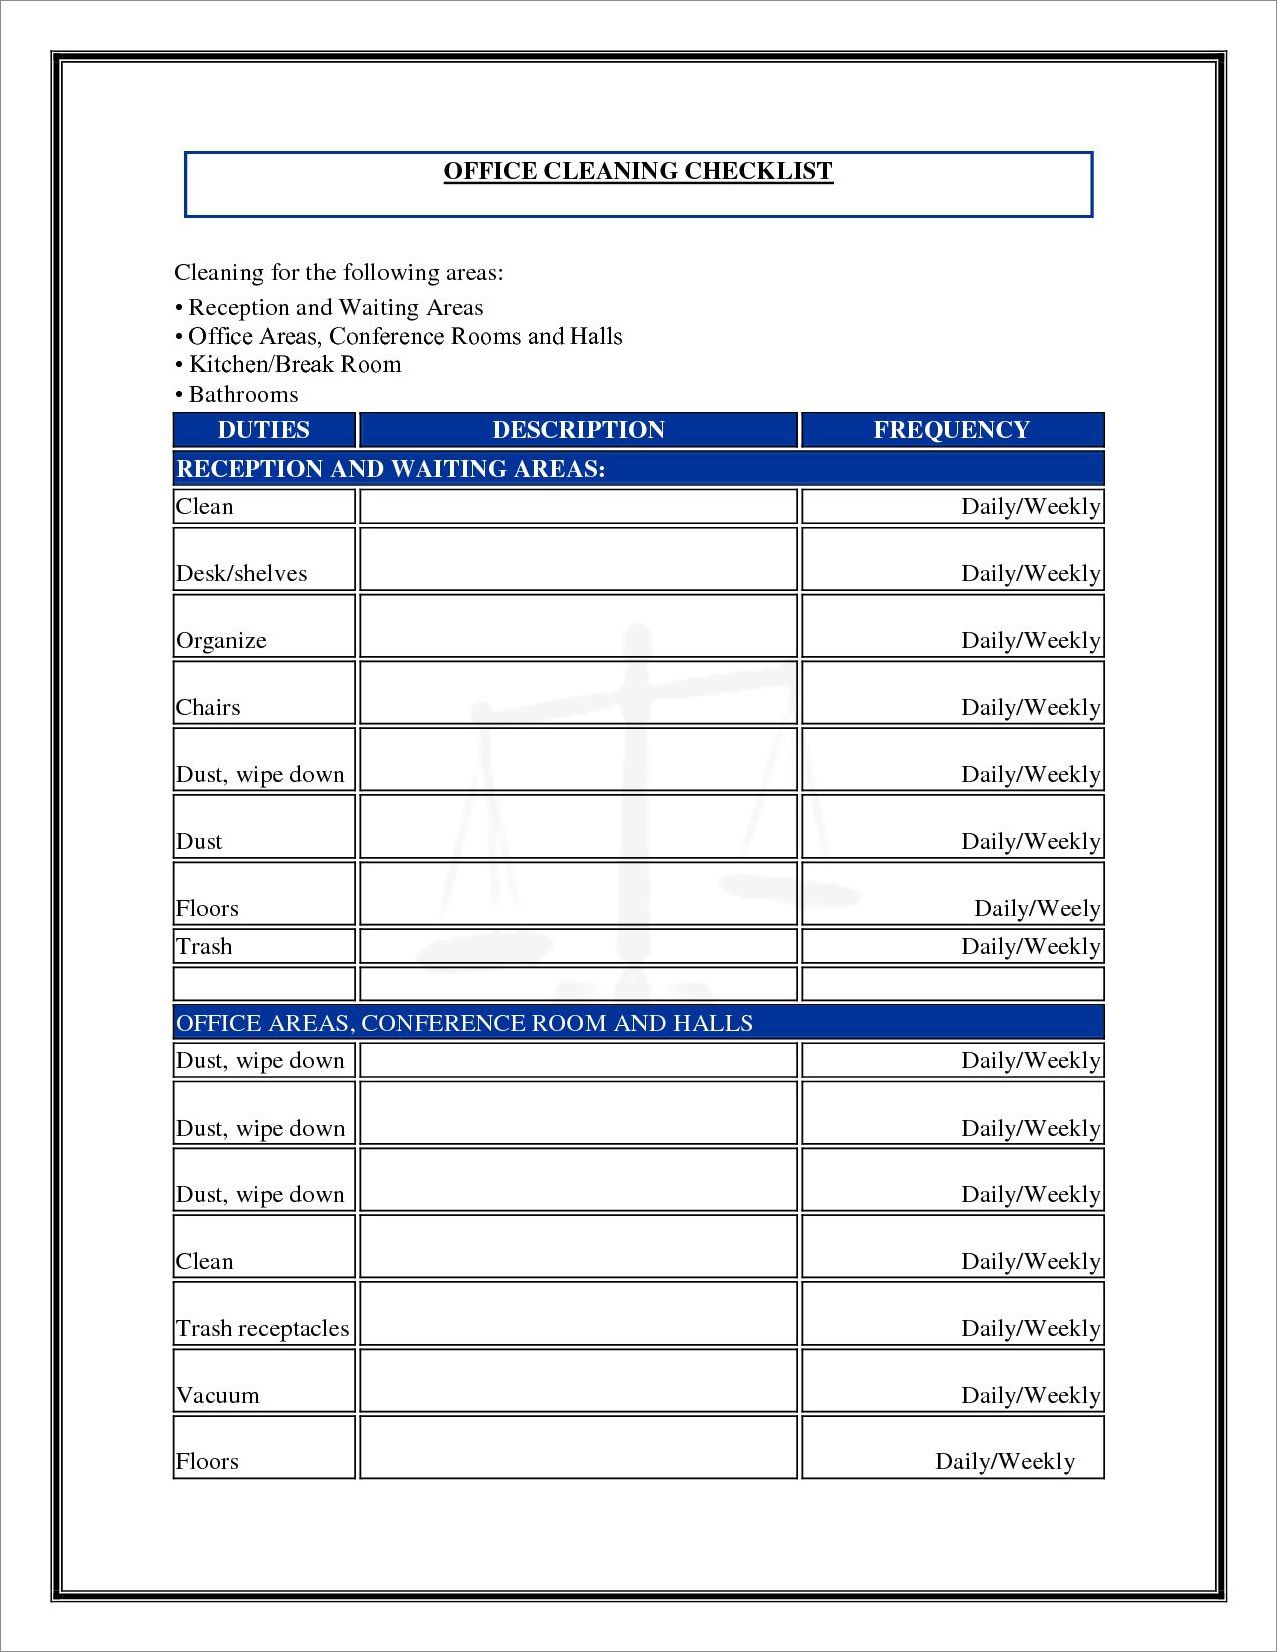 office cleaning schedule template example